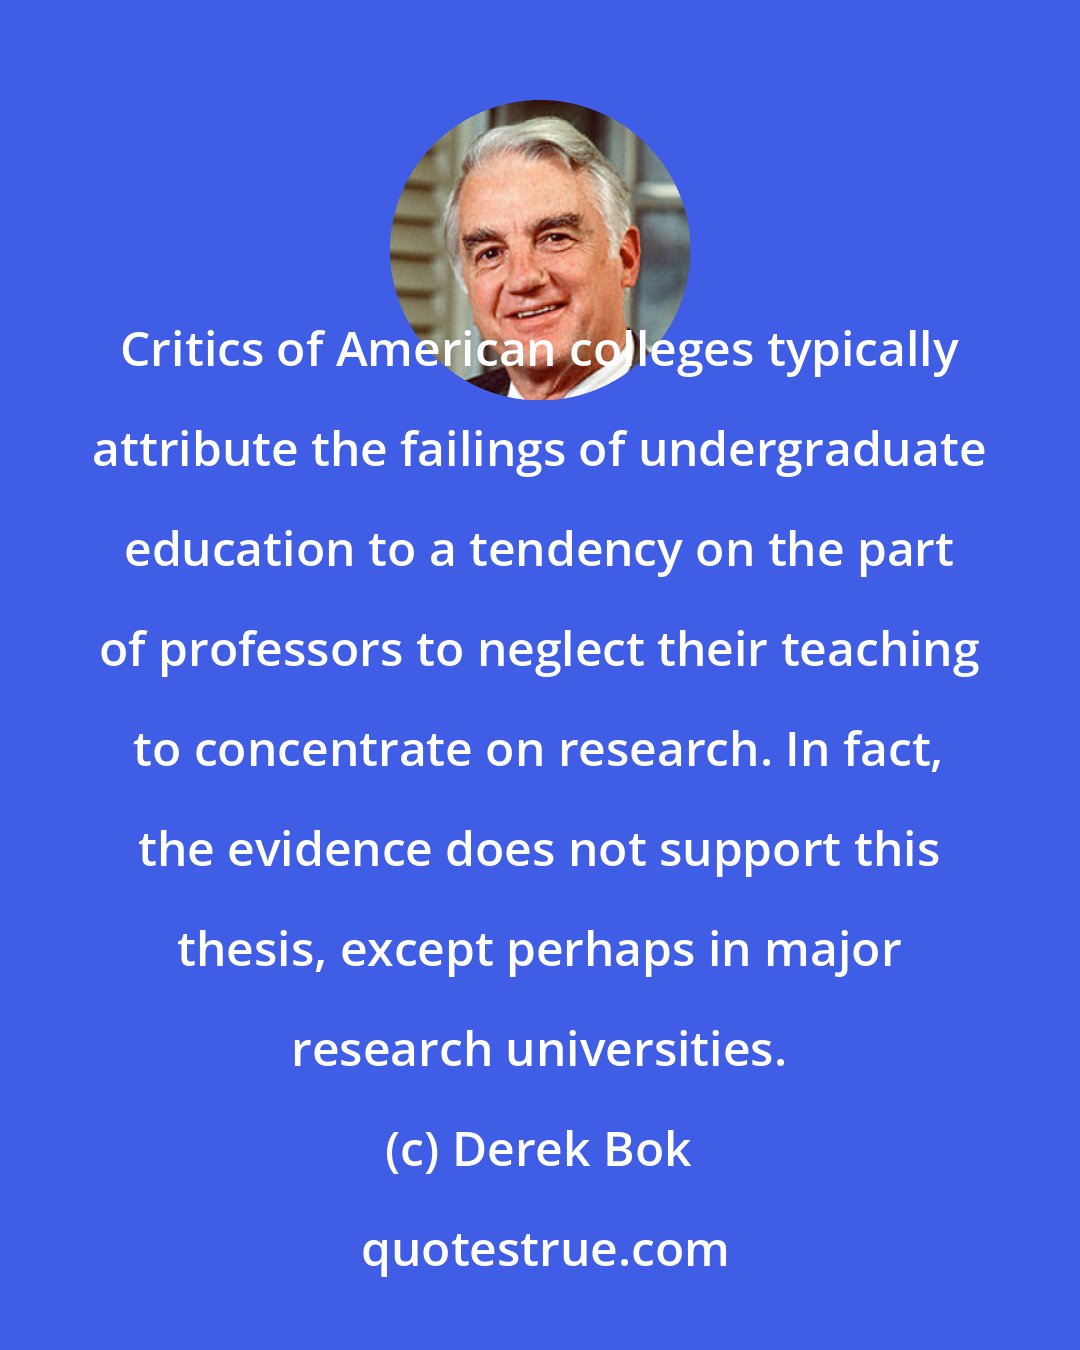 Derek Bok: Critics of American colleges typically attribute the failings of undergraduate education to a tendency on the part of professors to neglect their teaching to concentrate on research. In fact, the evidence does not support this thesis, except perhaps in major research universities.